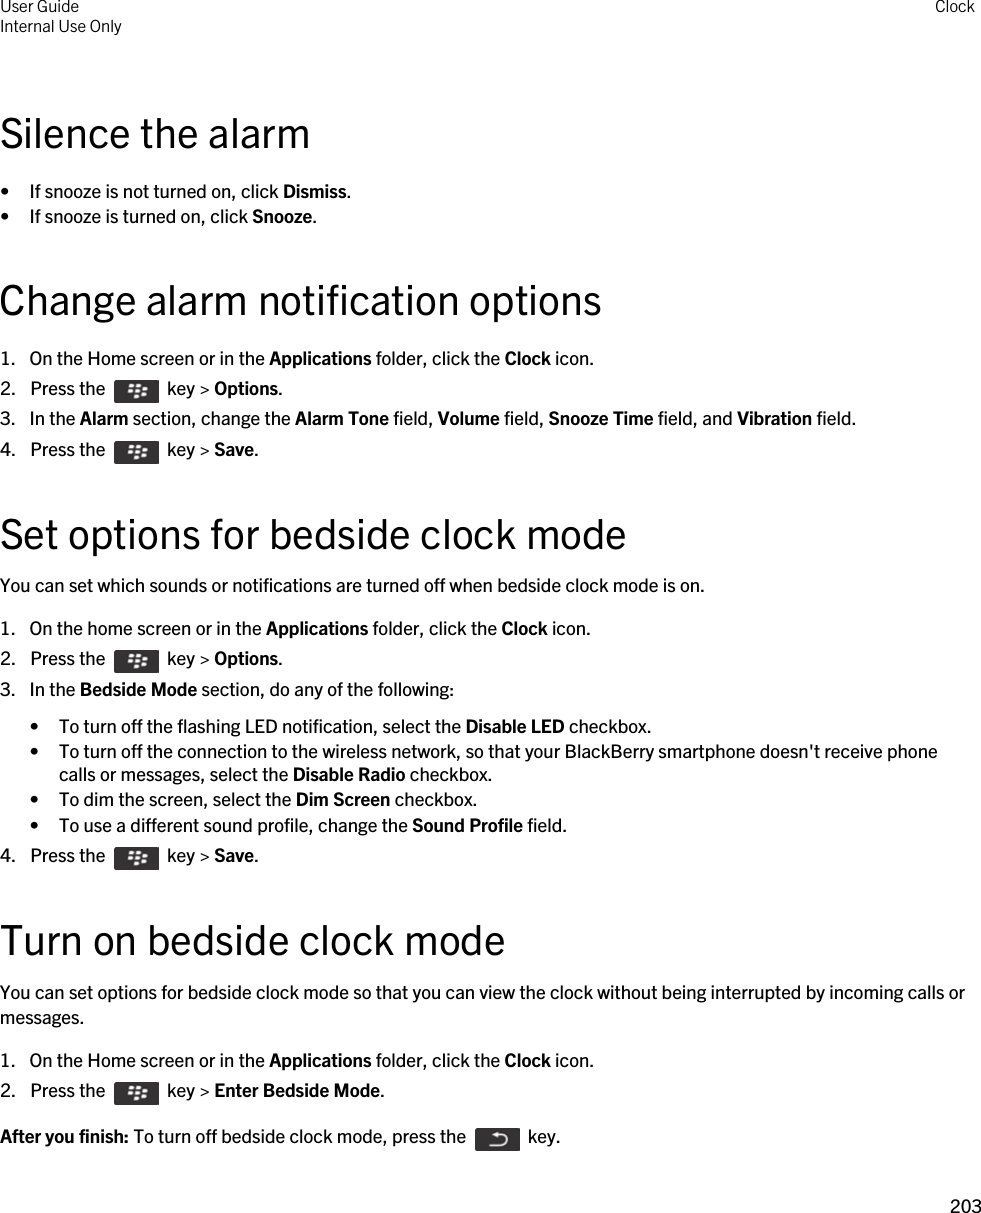 Silence the alarm• If snooze is not turned on, click Dismiss.• If snooze is turned on, click Snooze.Change alarm notification options1. On the Home screen or in the Applications folder, click the Clock icon.2.  Press the    key &gt; Options. 3. In the Alarm section, change the Alarm Tone field, Volume field, Snooze Time field, and Vibration field.4.  Press the    key &gt; Save. Set options for bedside clock modeYou can set which sounds or notifications are turned off when bedside clock mode is on.1. On the home screen or in the Applications folder, click the Clock icon.2.  Press the    key &gt; Options. 3. In the Bedside Mode section, do any of the following:• To turn off the flashing LED notification, select the Disable LED checkbox.• To turn off the connection to the wireless network, so that your BlackBerry smartphone doesn&apos;t receive phone calls or messages, select the Disable Radio checkbox.• To dim the screen, select the Dim Screen checkbox.• To use a different sound profile, change the Sound Profile field.4.  Press the    key &gt; Save. Turn on bedside clock modeYou can set options for bedside clock mode so that you can view the clock without being interrupted by incoming calls or messages.1. On the Home screen or in the Applications folder, click the Clock icon.2.  Press the    key &gt; Enter Bedside Mode.After you finish: To turn off bedside clock mode, press the    key.User GuideInternal Use Only Clock203 